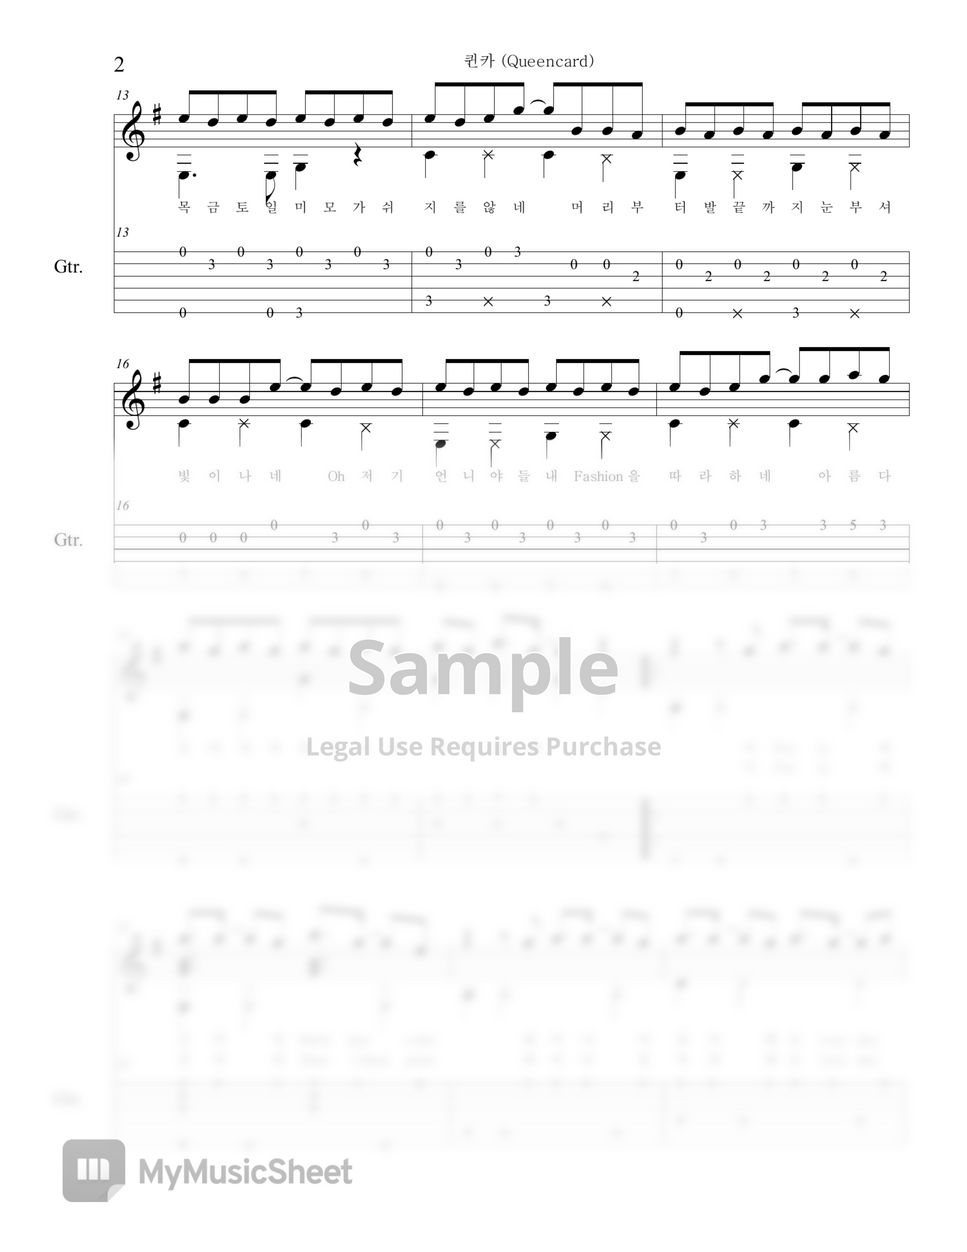 (G)I-DLE - Queencard (GUITAR TAB) by Woojeong Park